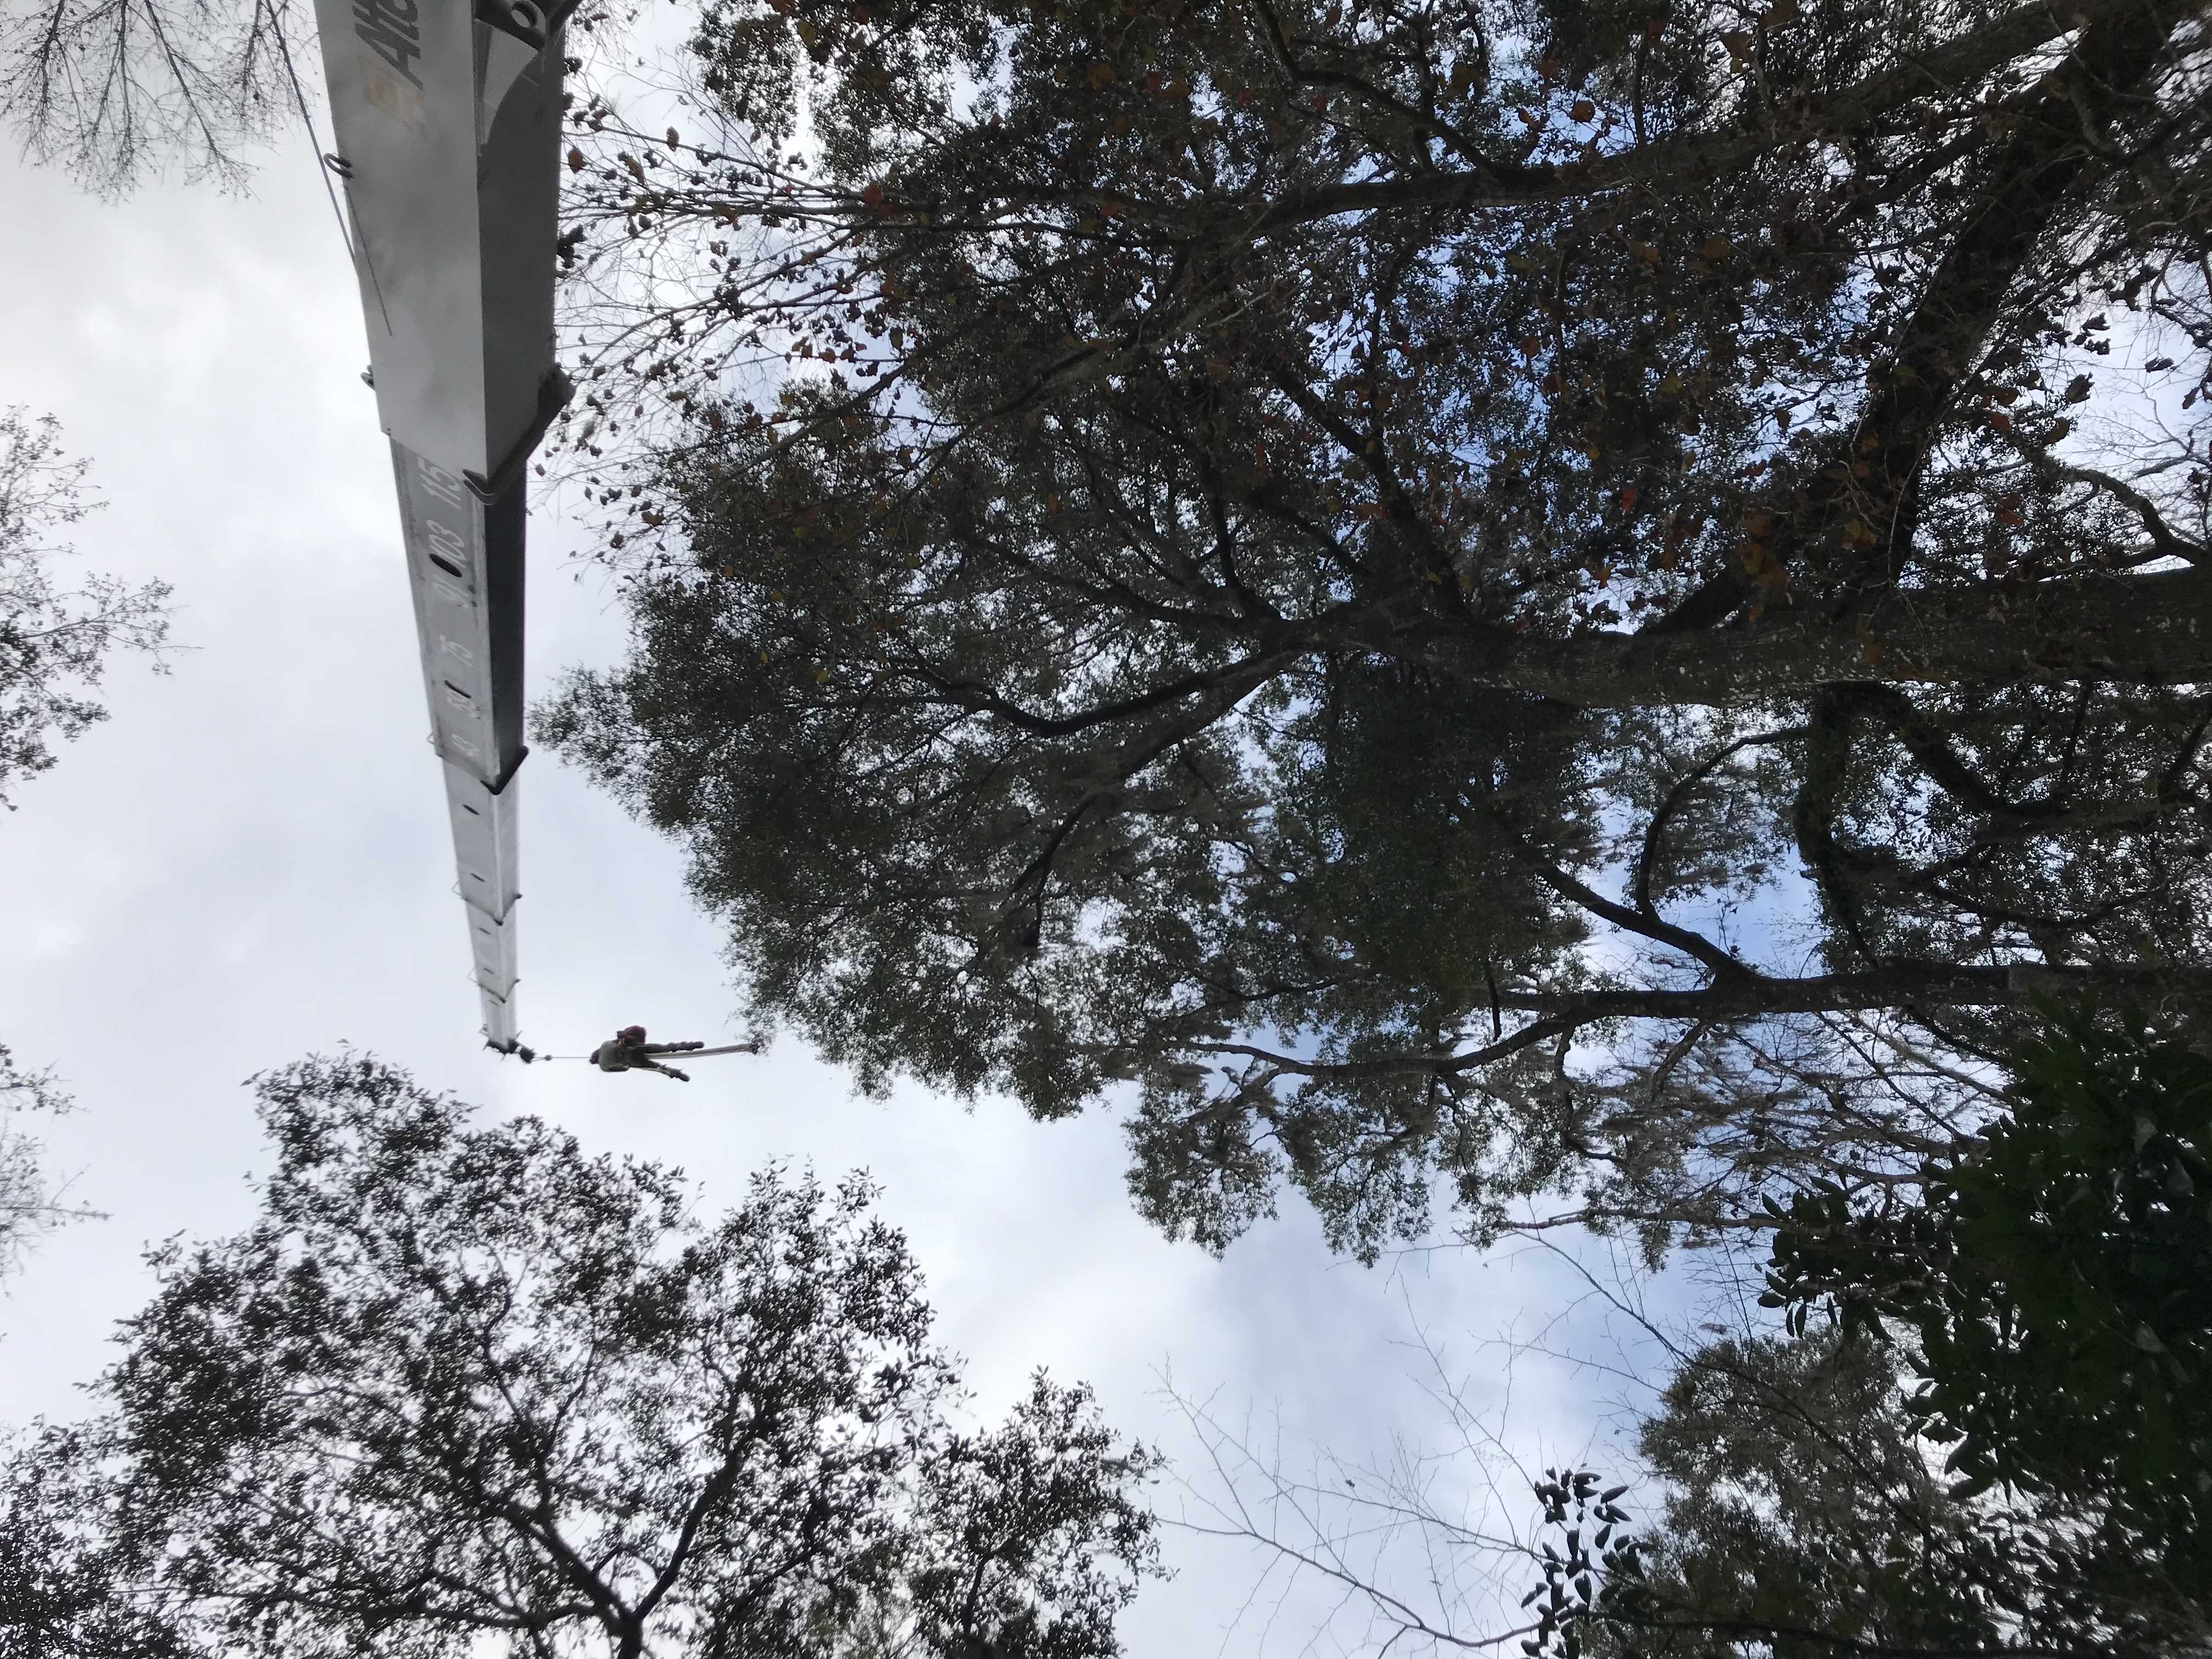 A crane lifting an arborist to the top of a tree.